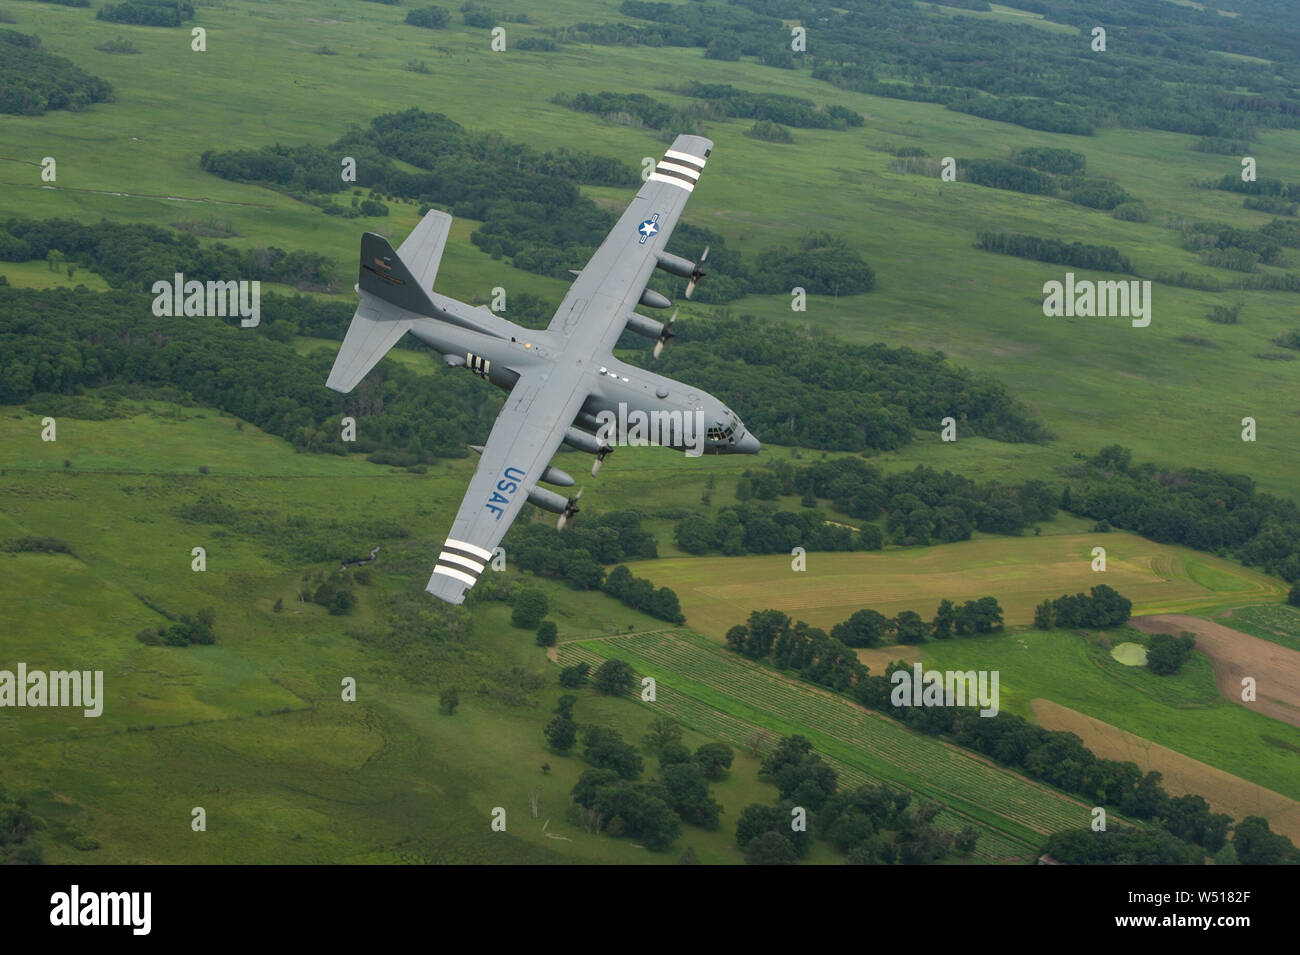 A U.S. Air Force C-130H Hercules aircraft from the 96th Airlift Squadron, Minneapolis-St. Paul Air Reserve Station, Minn., flies over Minnesota, July 16, 2019. Aircraft number 23284 was painted with WWII invasion stripes in honor of the 75th anniversary of D-Day. Originally activated as the 96th Troop Carrier Squadron, the 96th, dropped paratroops of the 101st Airborne Division in Normandy during the D-Day invasion and flew numerous missions to bring in reinforcements and needed supplies during the war. (U.S. Air Force Photo by Tech. Sgt. Amber E. N. Kurka) Stock Photo